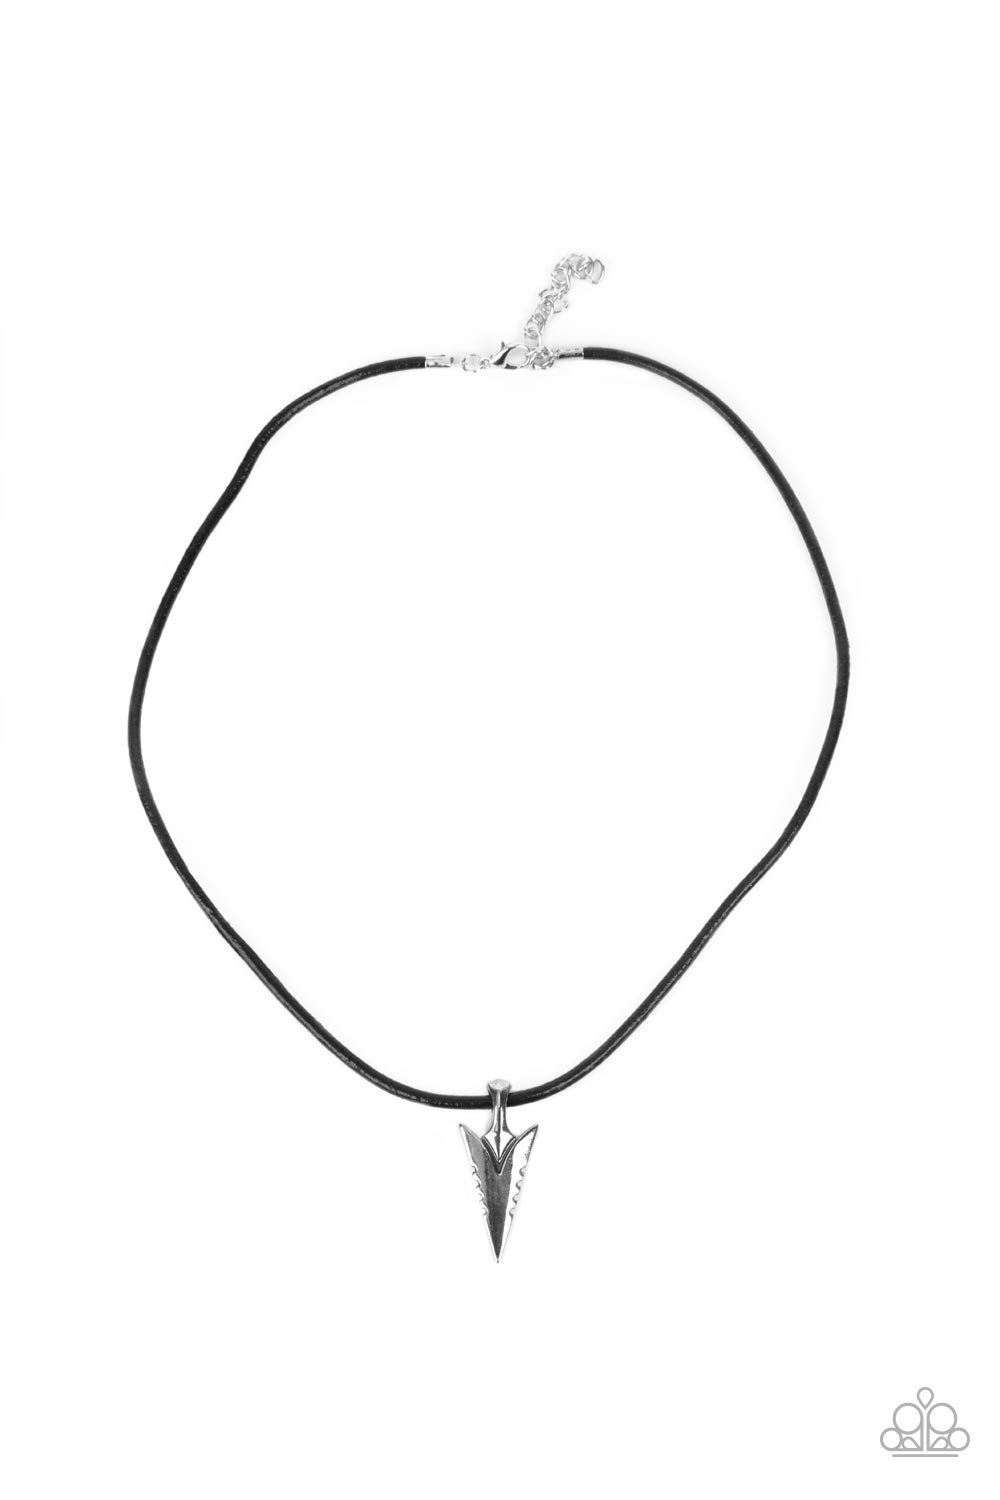 Pharaohs Arrow Paparazzi Accessories Necklace with Earrings - Black